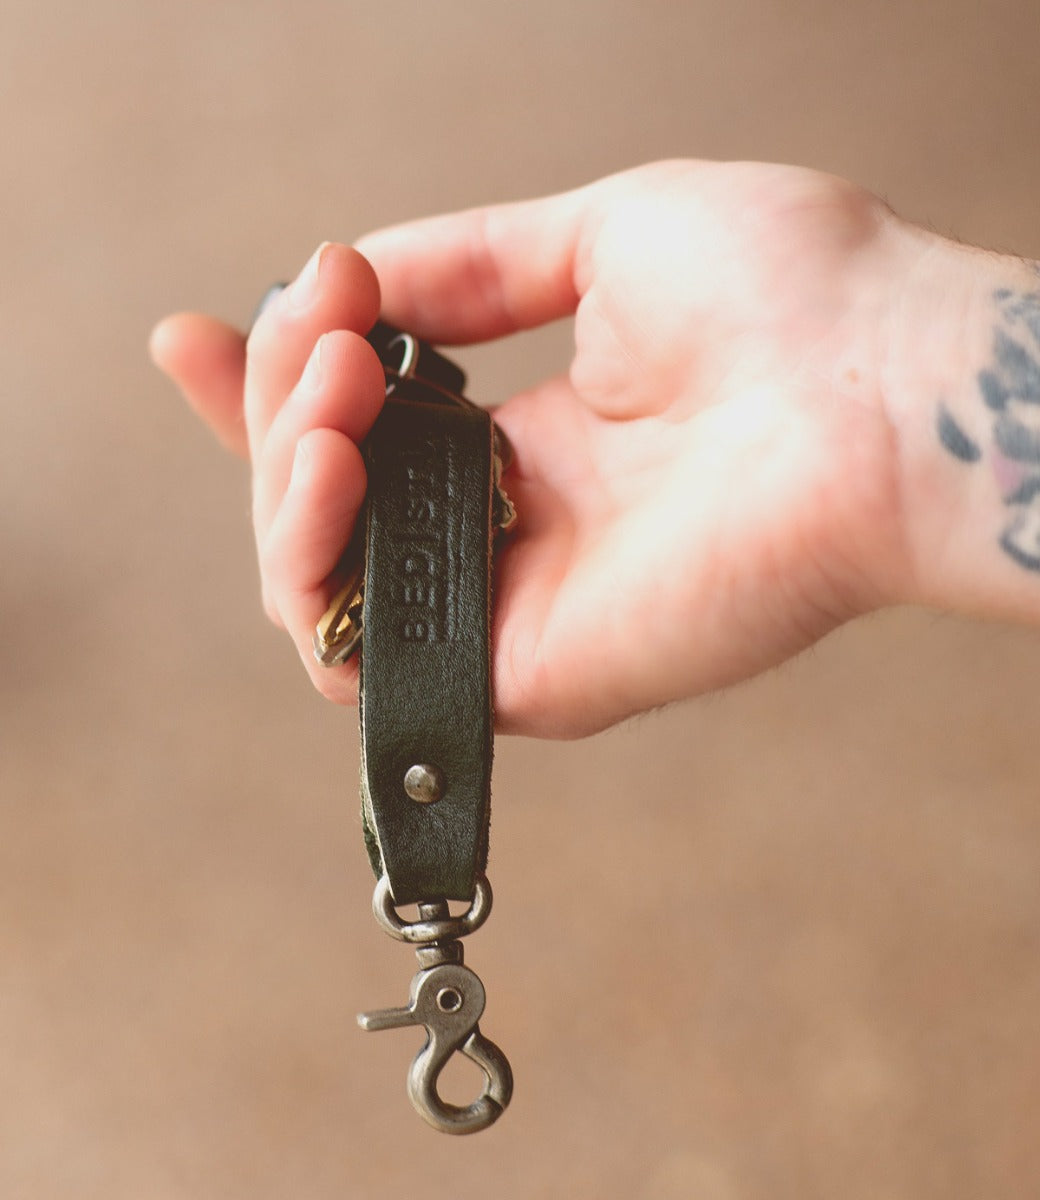 A person holding a Keygrab leather key ring with a tattoo on it from the Bed Stu brand.